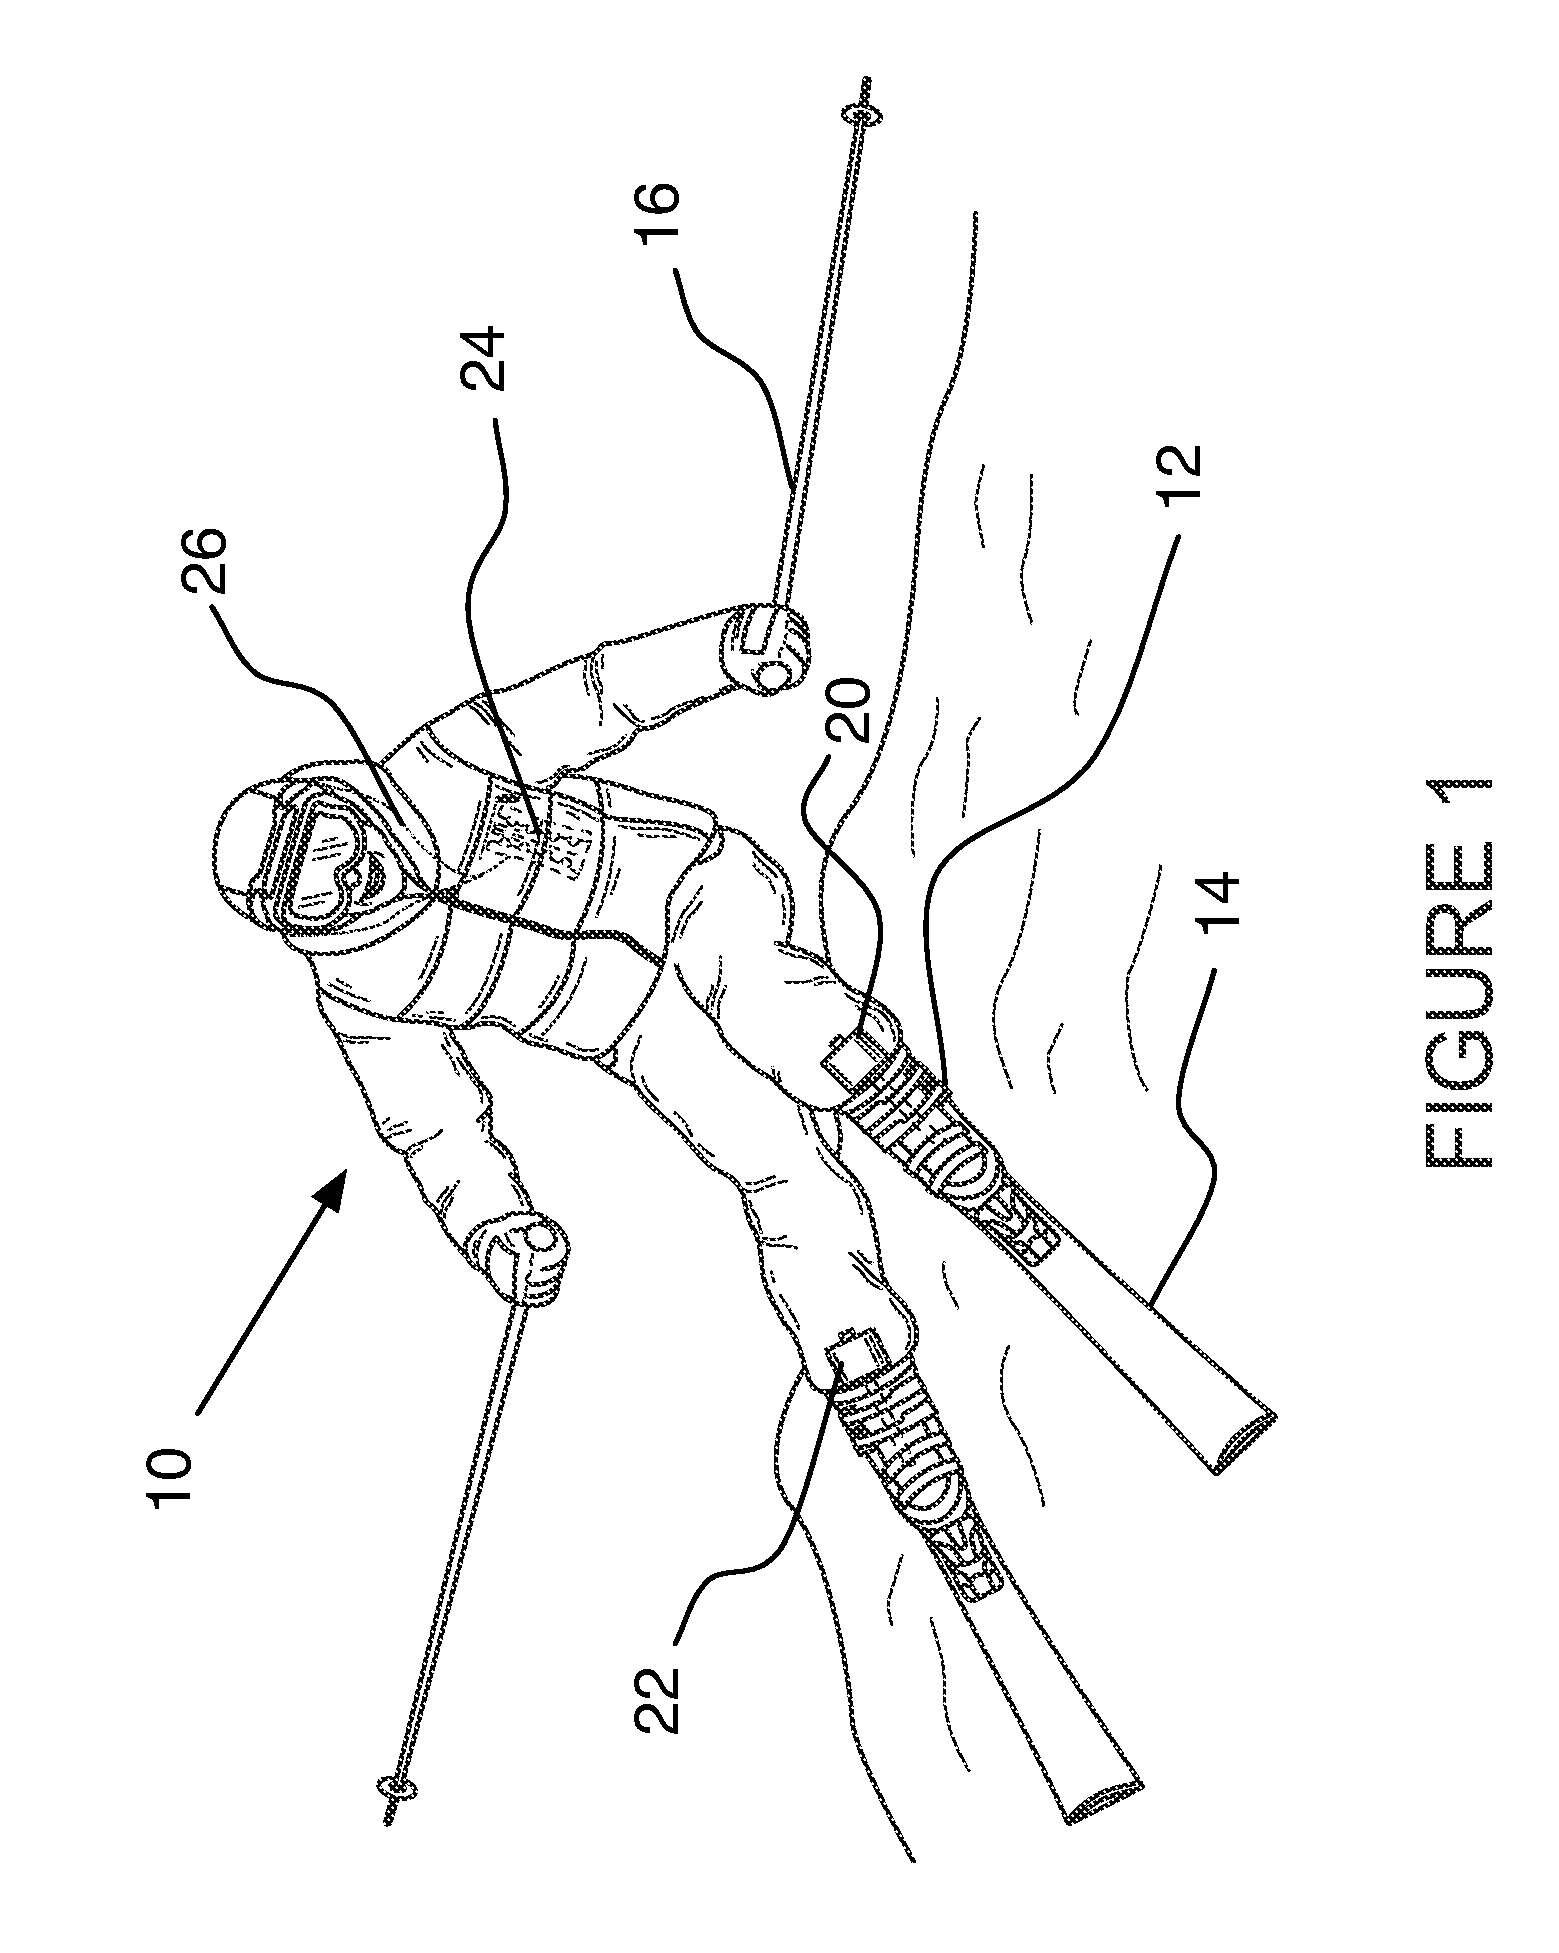 Sport performance monitoring apparatus, process, and method of use